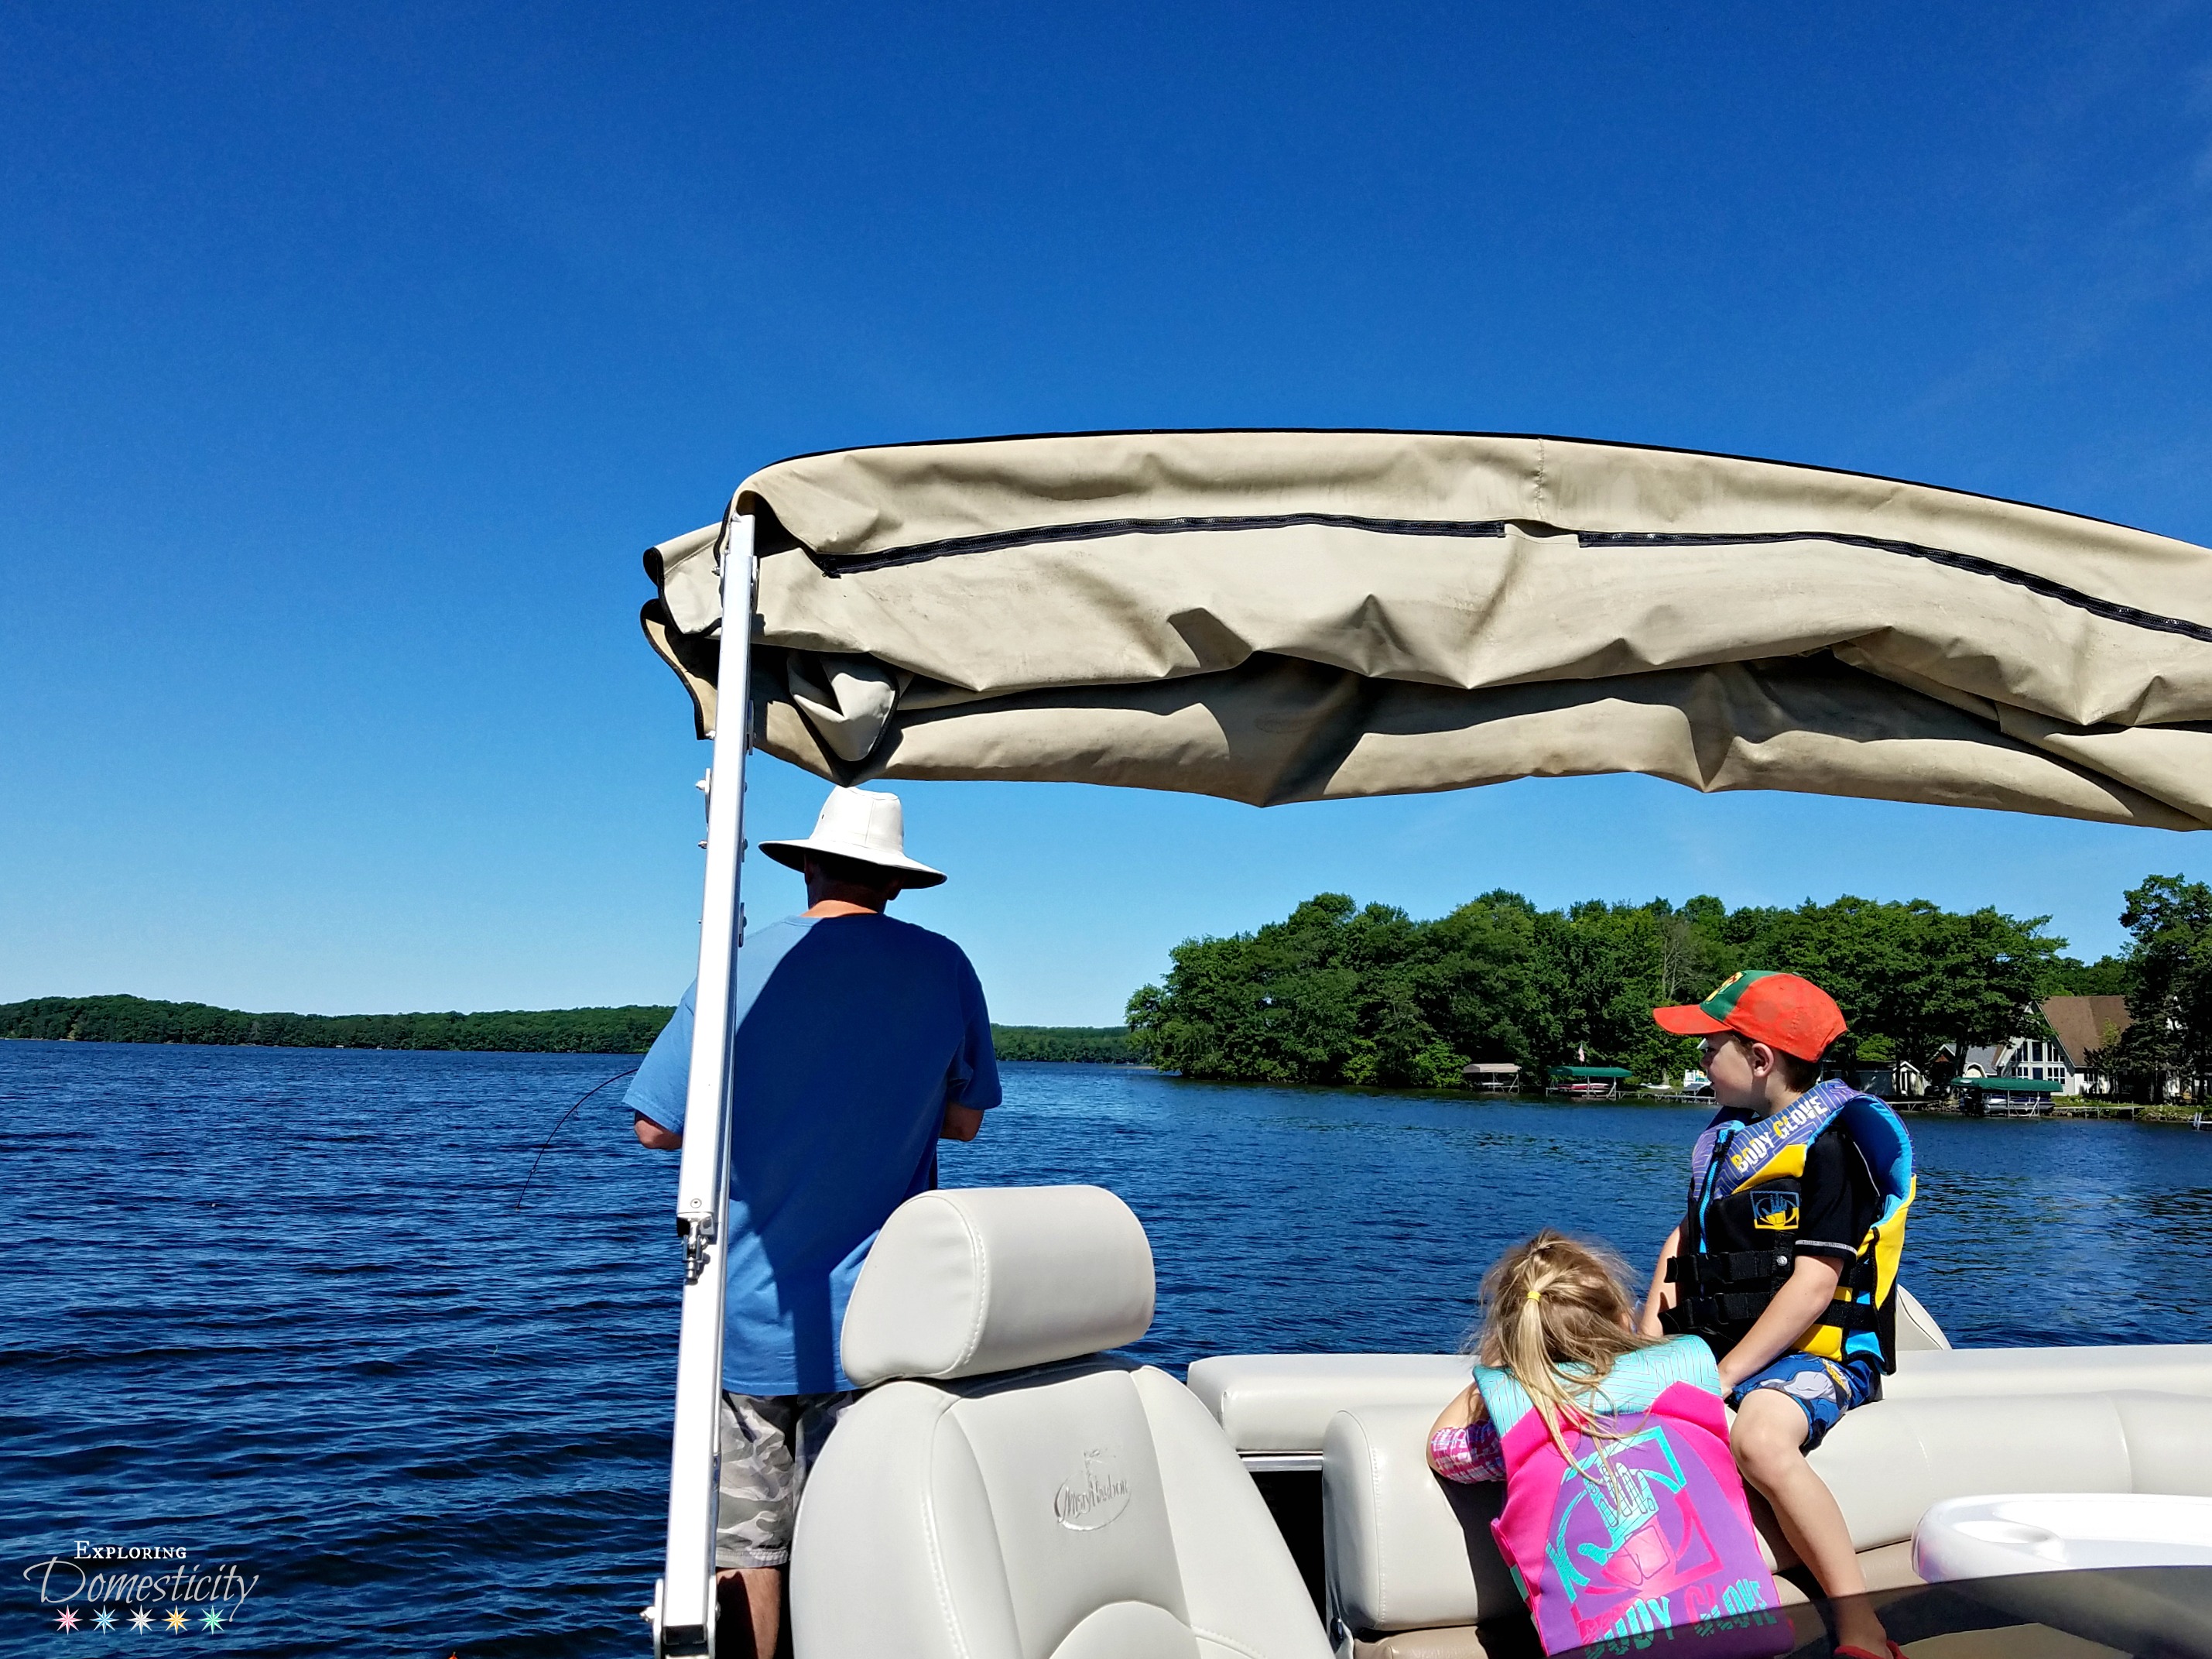 Family Boating Essentials: 12 must-haves for a fun day on the boat